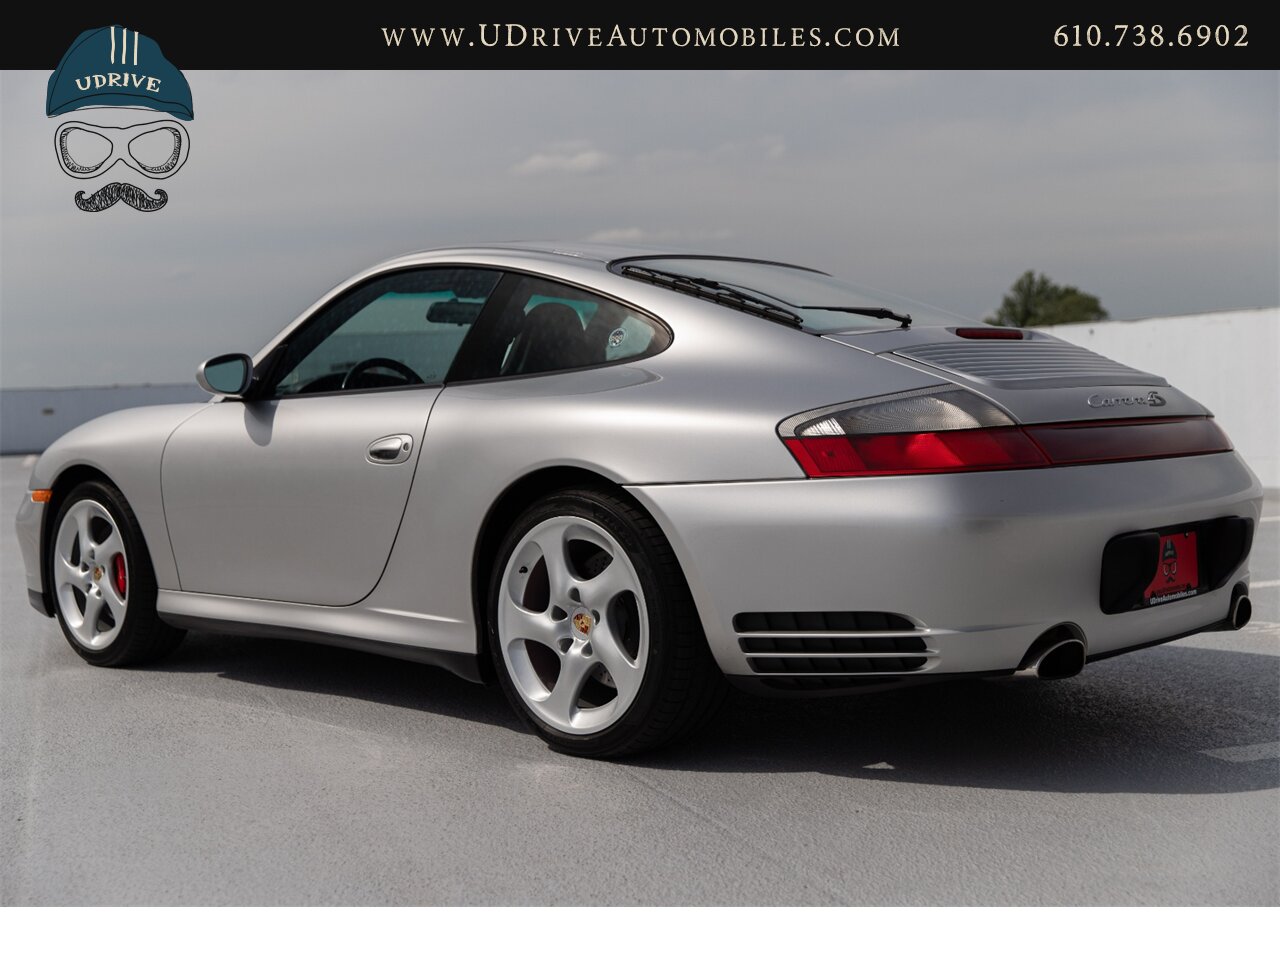 2003 Porsche 911 Carrera 4S C4S 6 Speed Manual Sport Seats  Leather Covered Hardback Seats - Photo 25 - West Chester, PA 19382